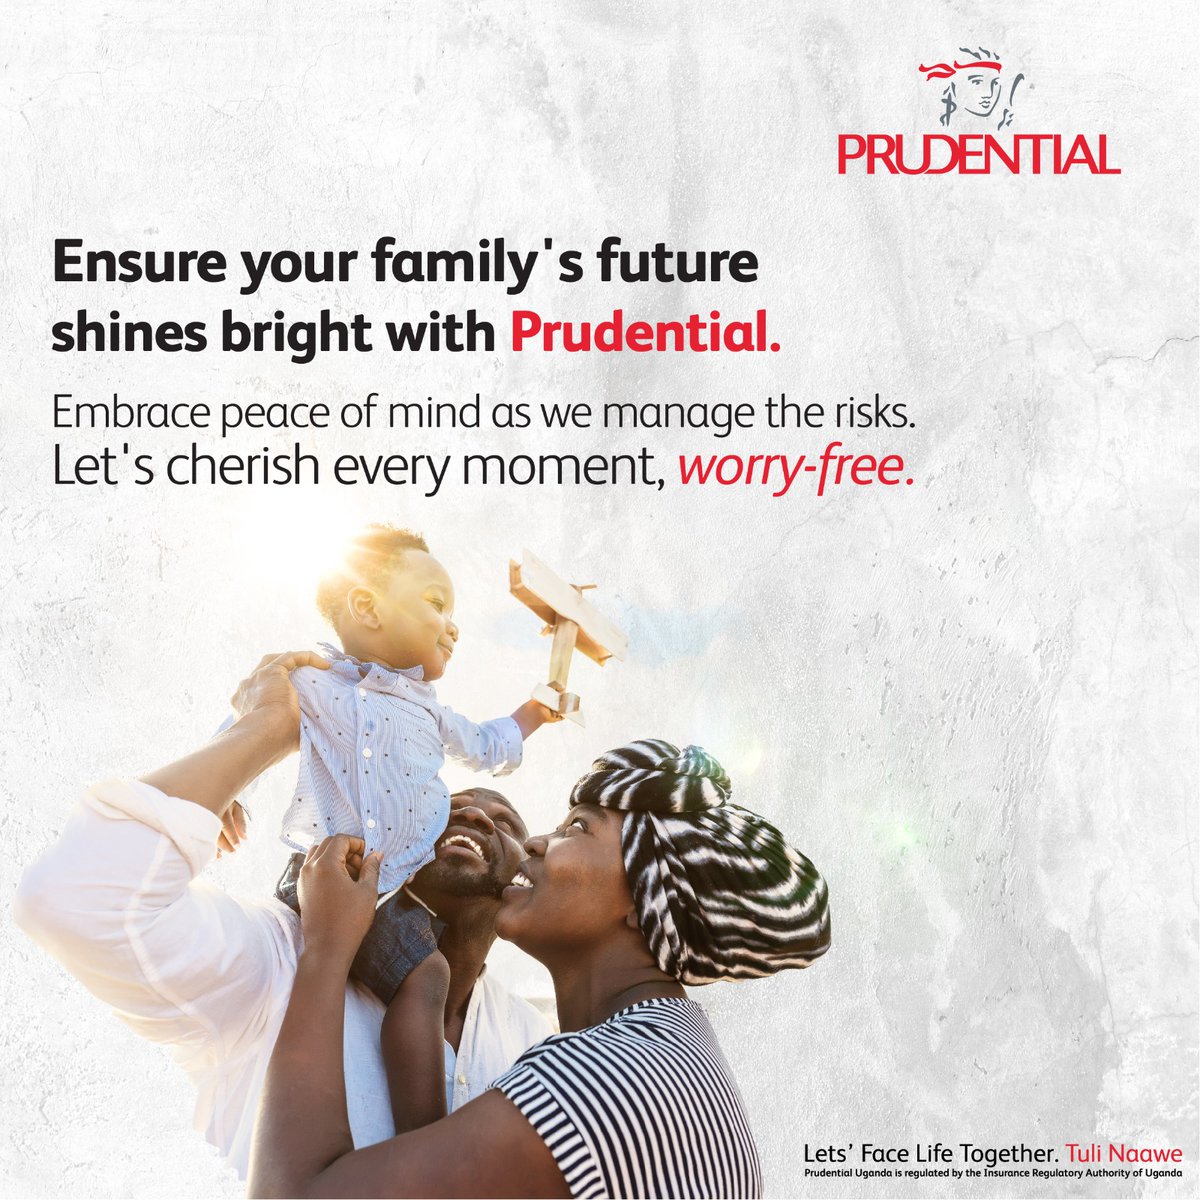 Make the future bright and worry-free for your family with Prudent Life Plan. Enjoy peace of mind as we expertly manage life's uncertainties, allowing you to cherish every precious moment.  The Prudent Life Plan offers coverage for both natural and accidental deaths,  a no-claim…